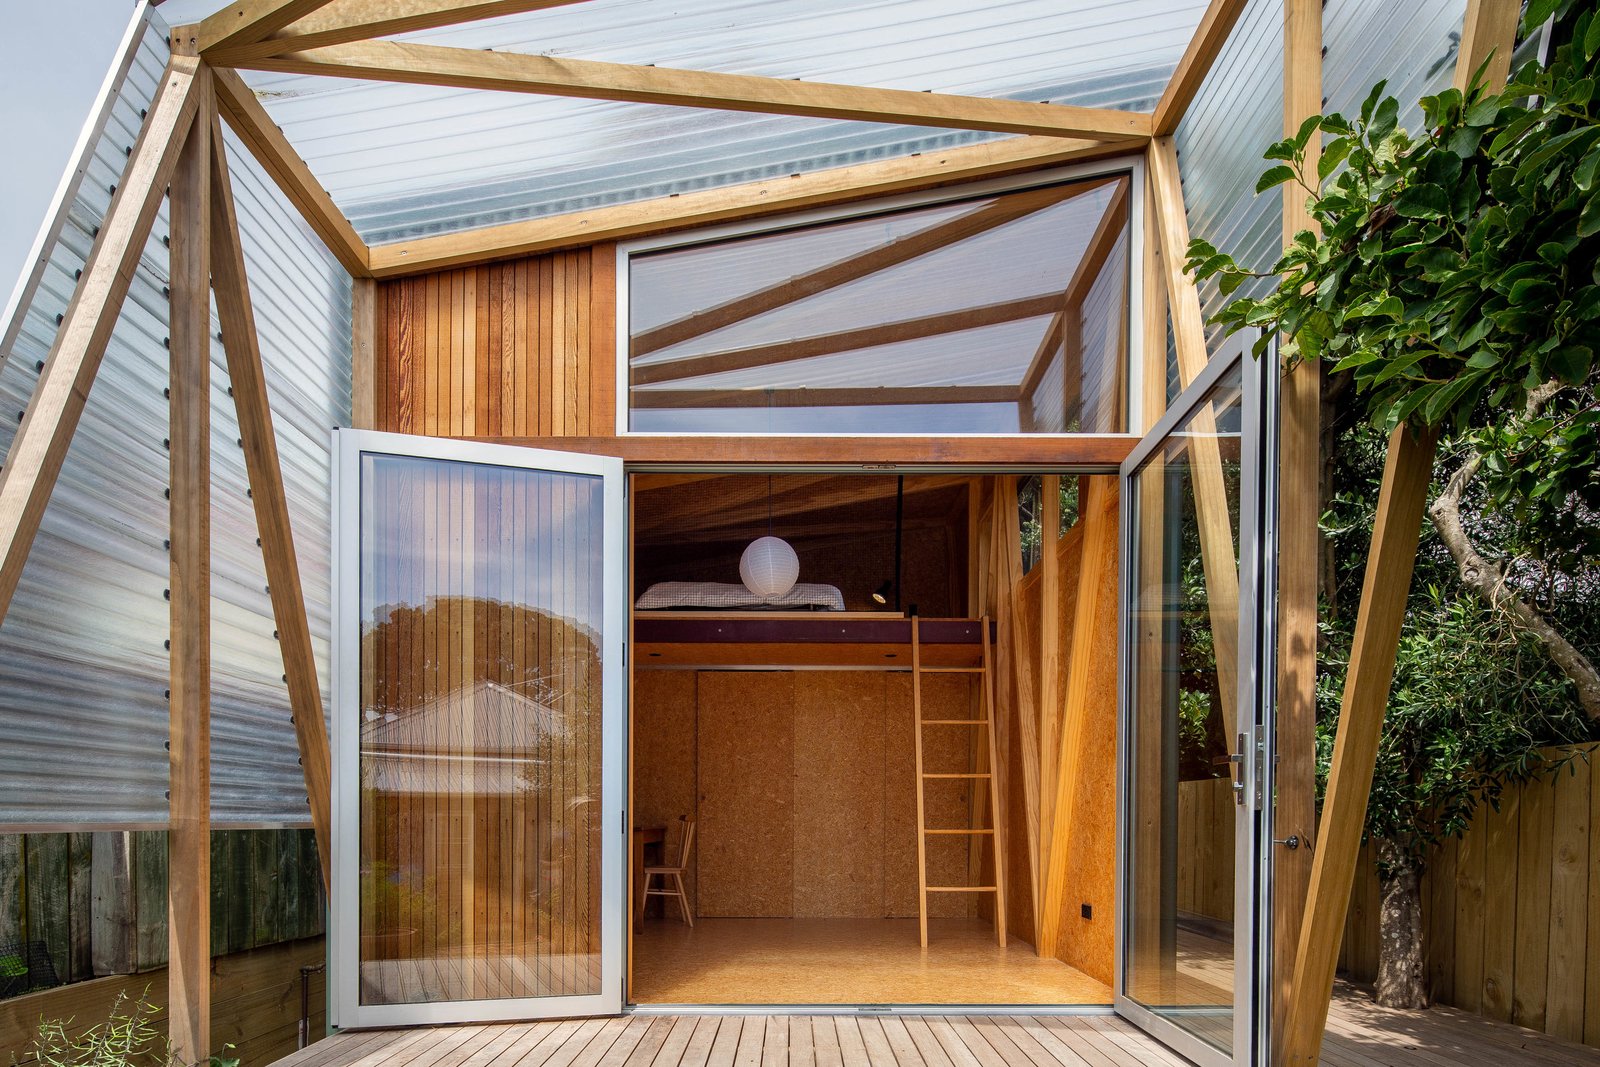 A Wellington, New Zealand, couple loved their neighborhood of Berhampore, but found that with two young sons, they were running out of space. They called on Parsonson Architects to devise a solution, which came in the form of a 183-square-foot studio in the backyard of their two-bedroom Victorian cottage. 